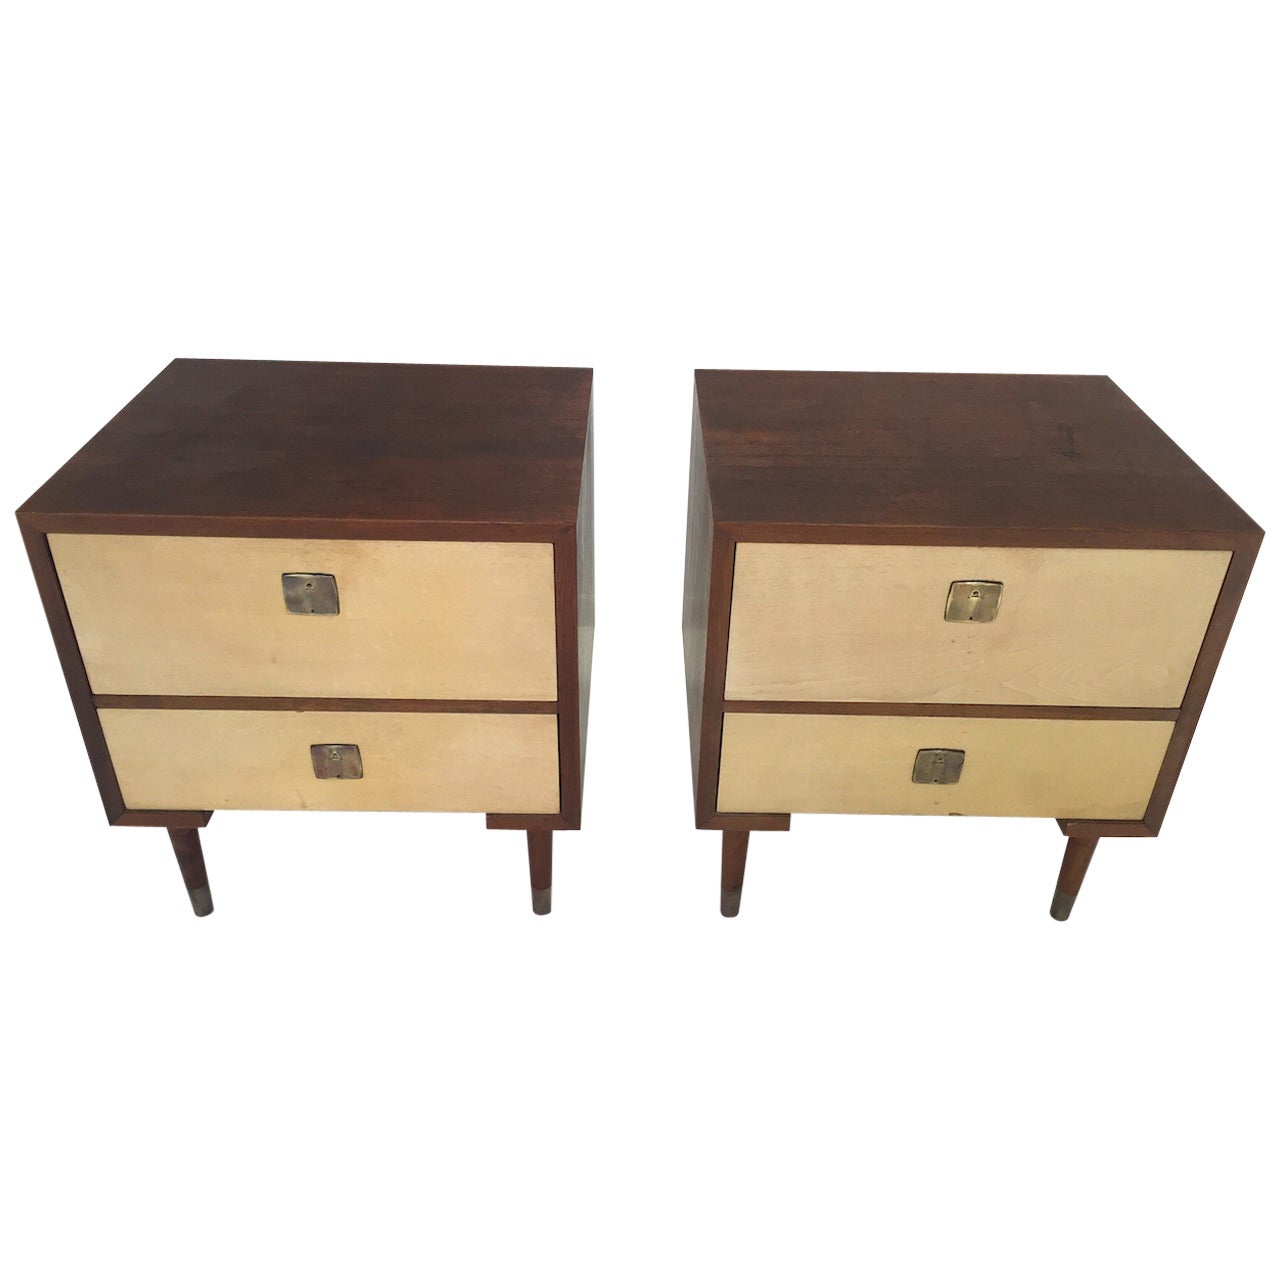 Pair of Paul Frankl Nightstands for Johnson Furniture Company